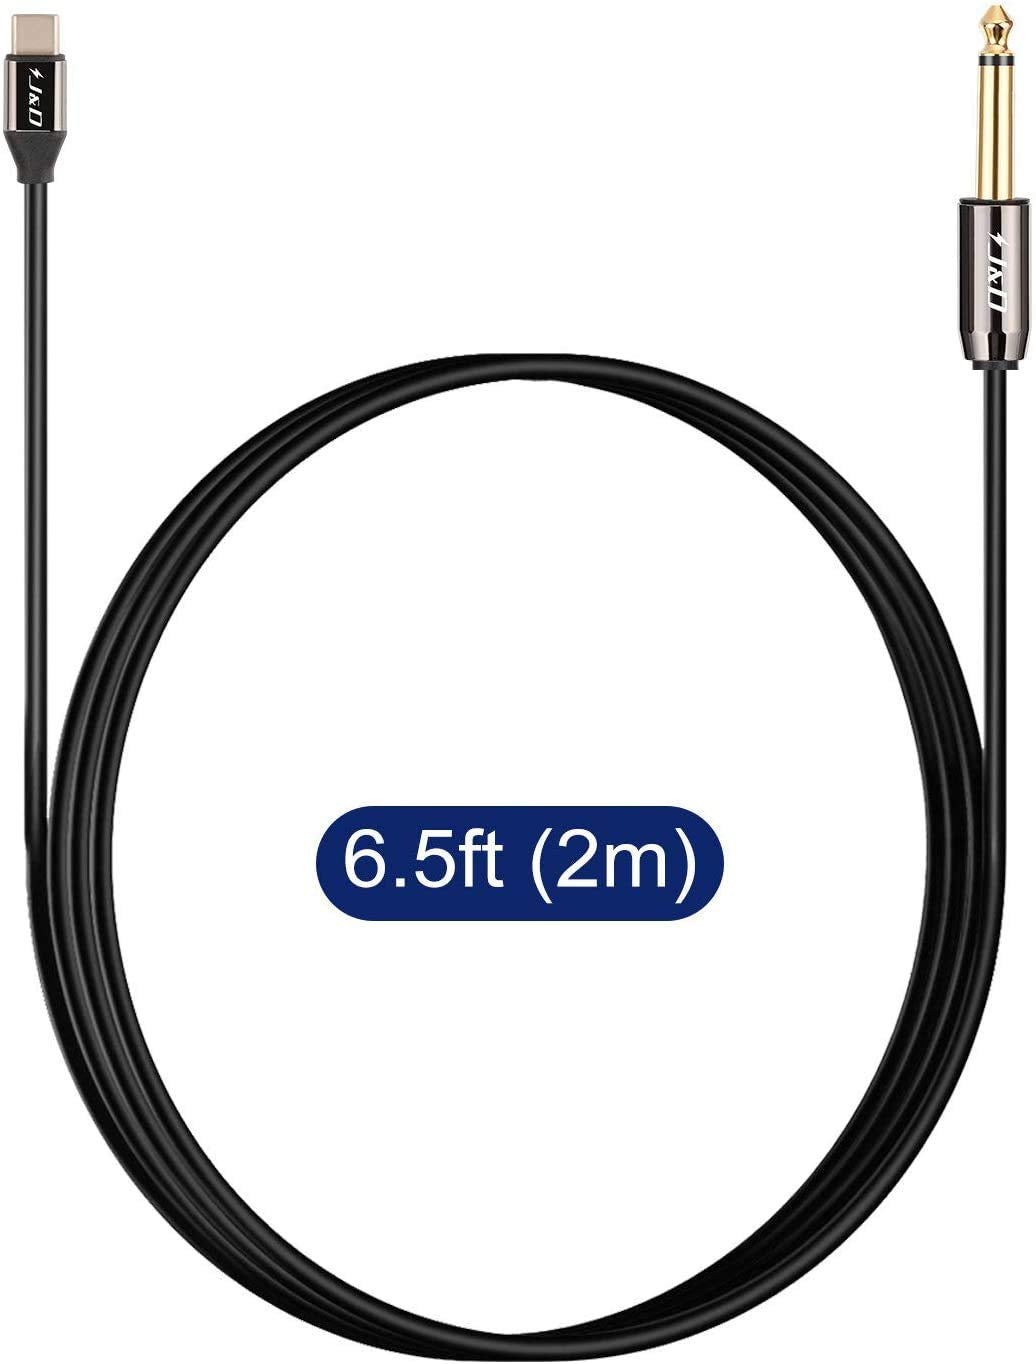 USB C Audio Cable from J&D Tech